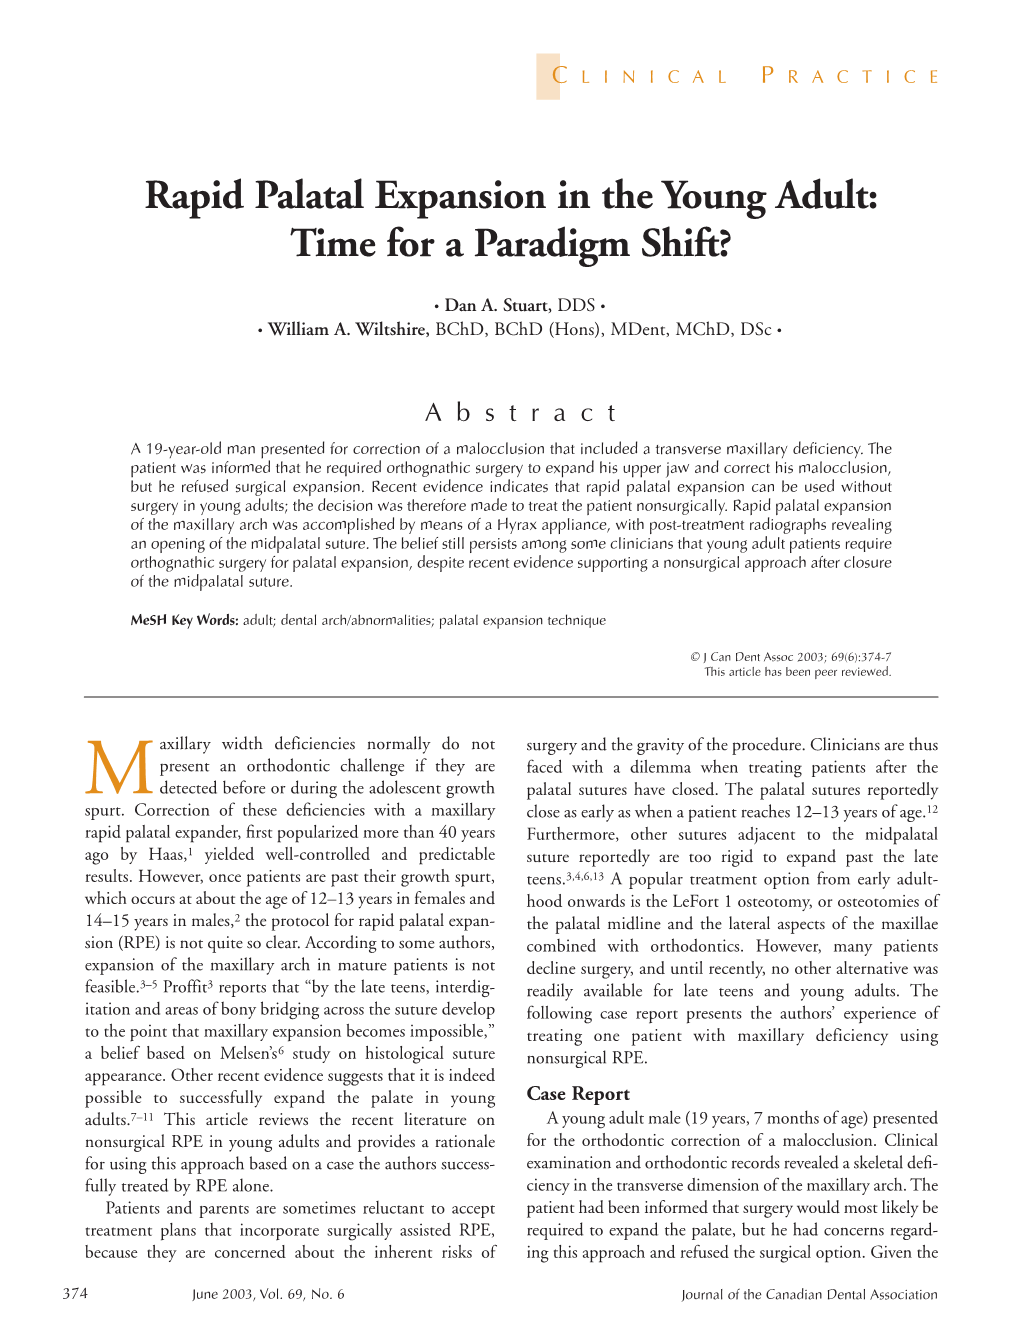 Rapid Palatal Expansion in the Young Adult: Time for a Paradigm Shift?